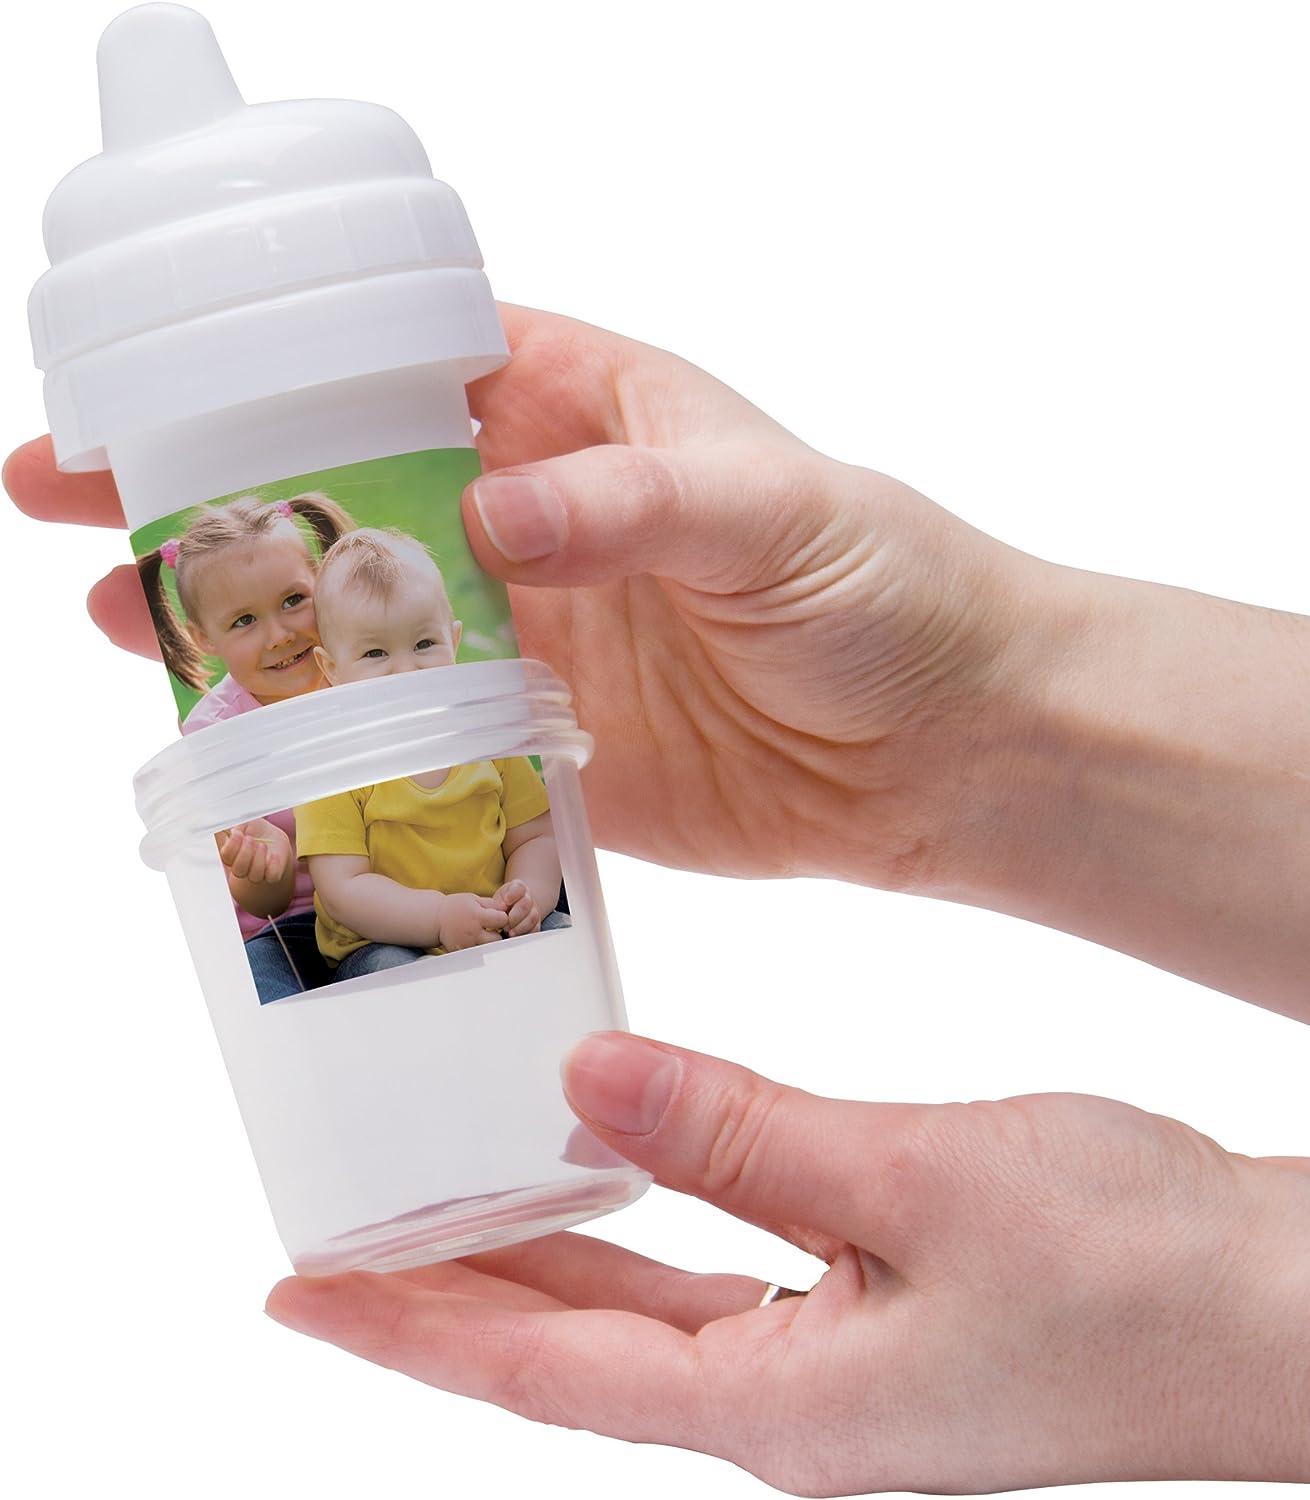 XL Spill Proof Sippy Cup